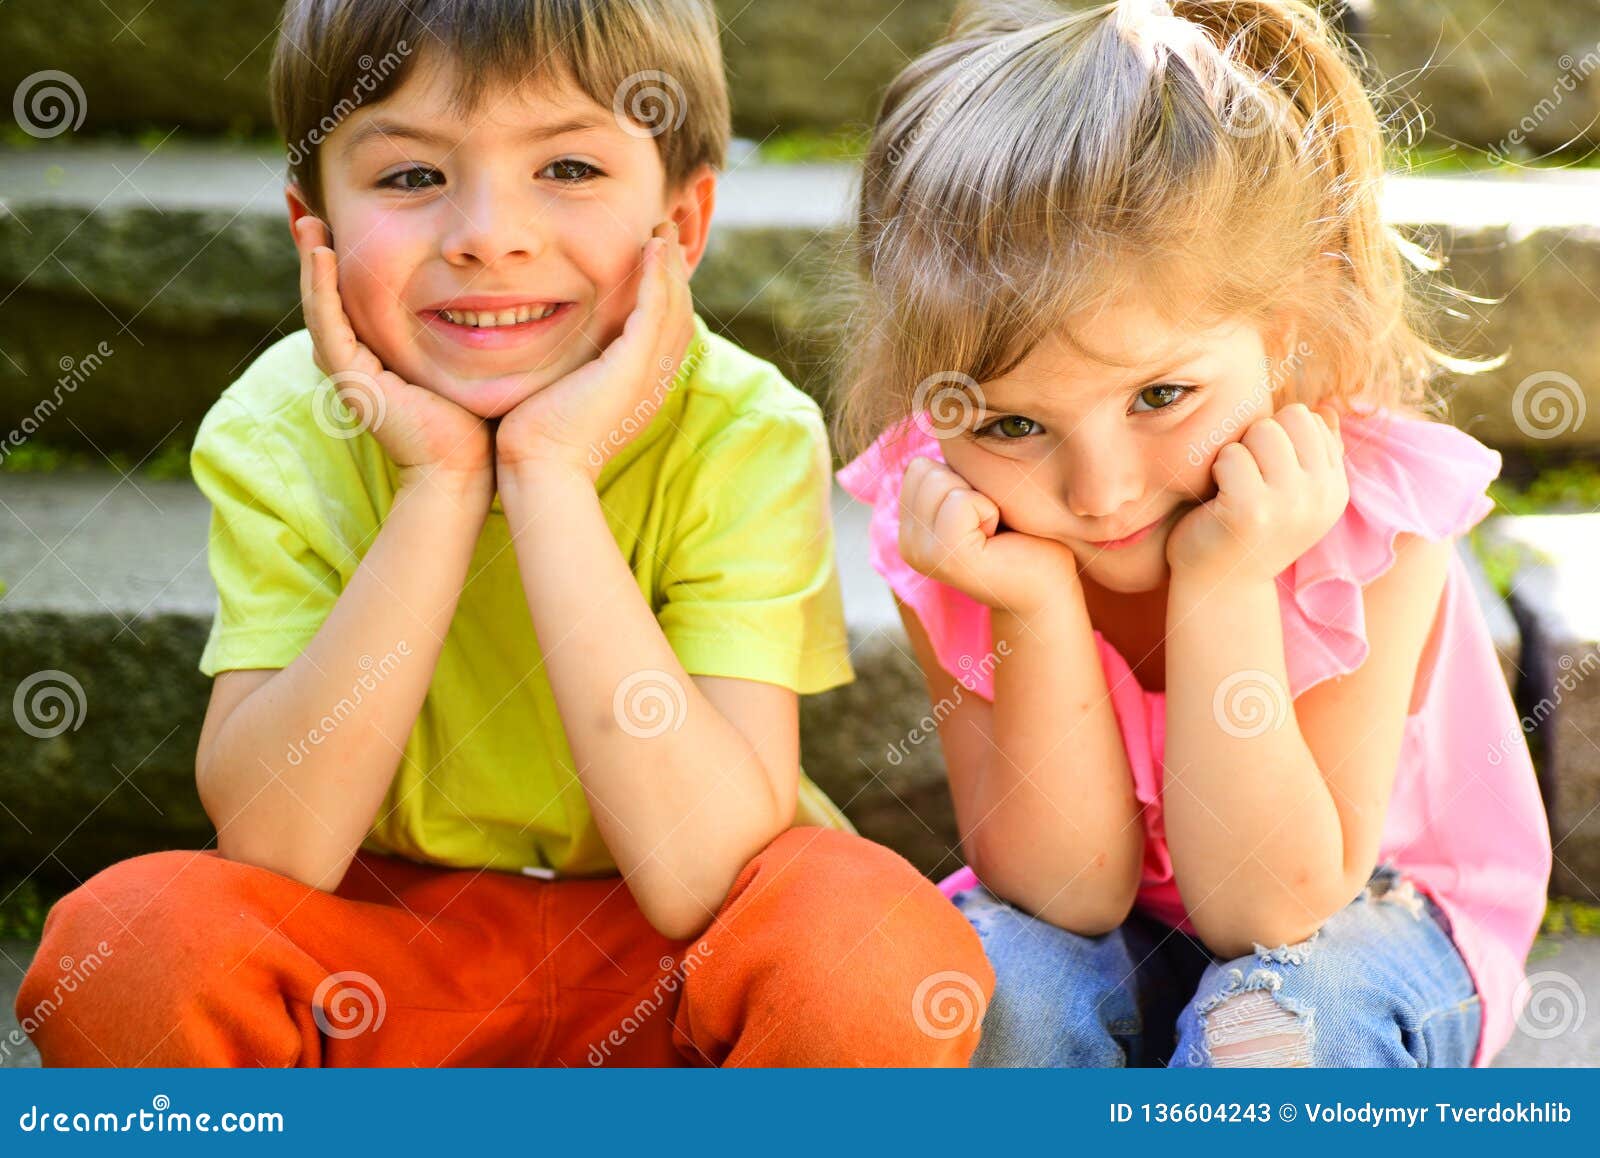 909 Little Boy Girl Best Friends Photos Free Royalty Free Stock Photos From Dreamstime